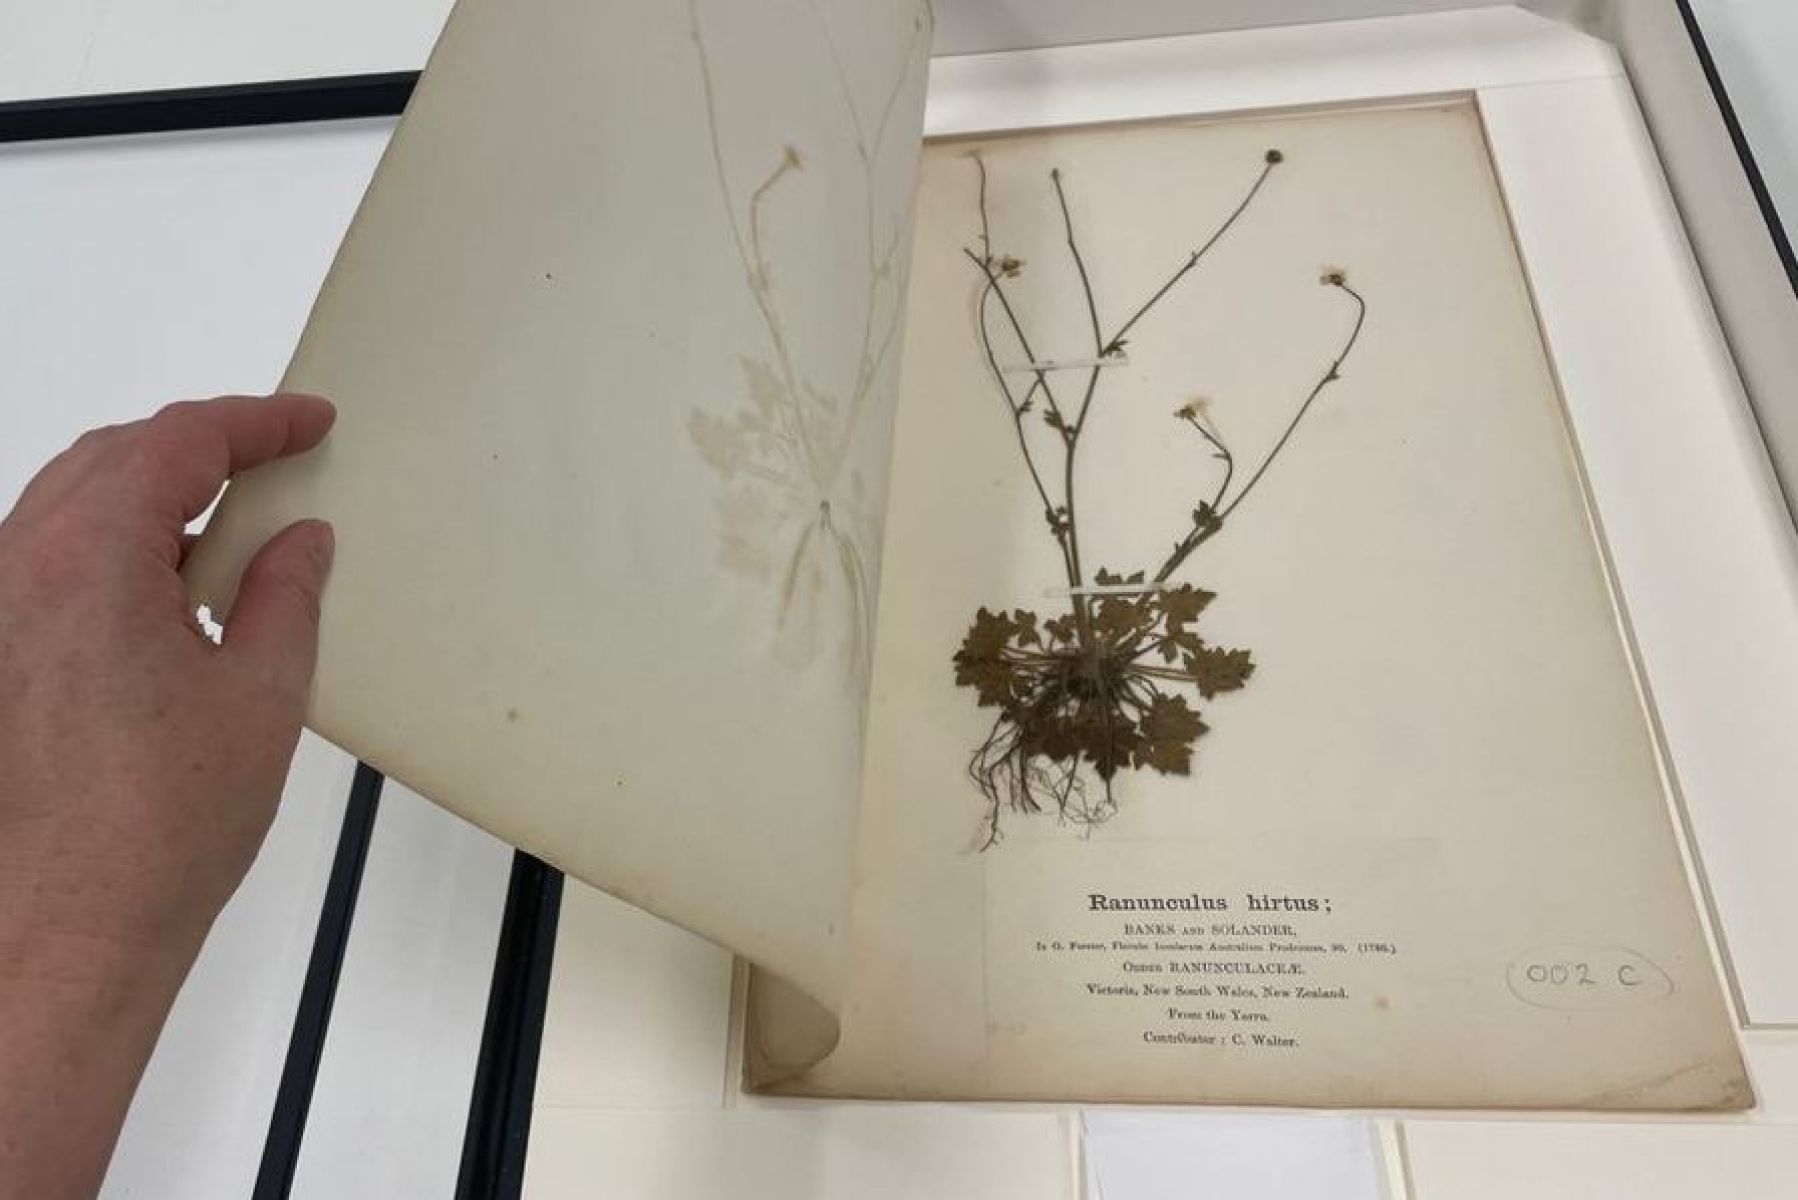 A hand can be seen holding a heritage listed specimen book that features a plant of some kind. 